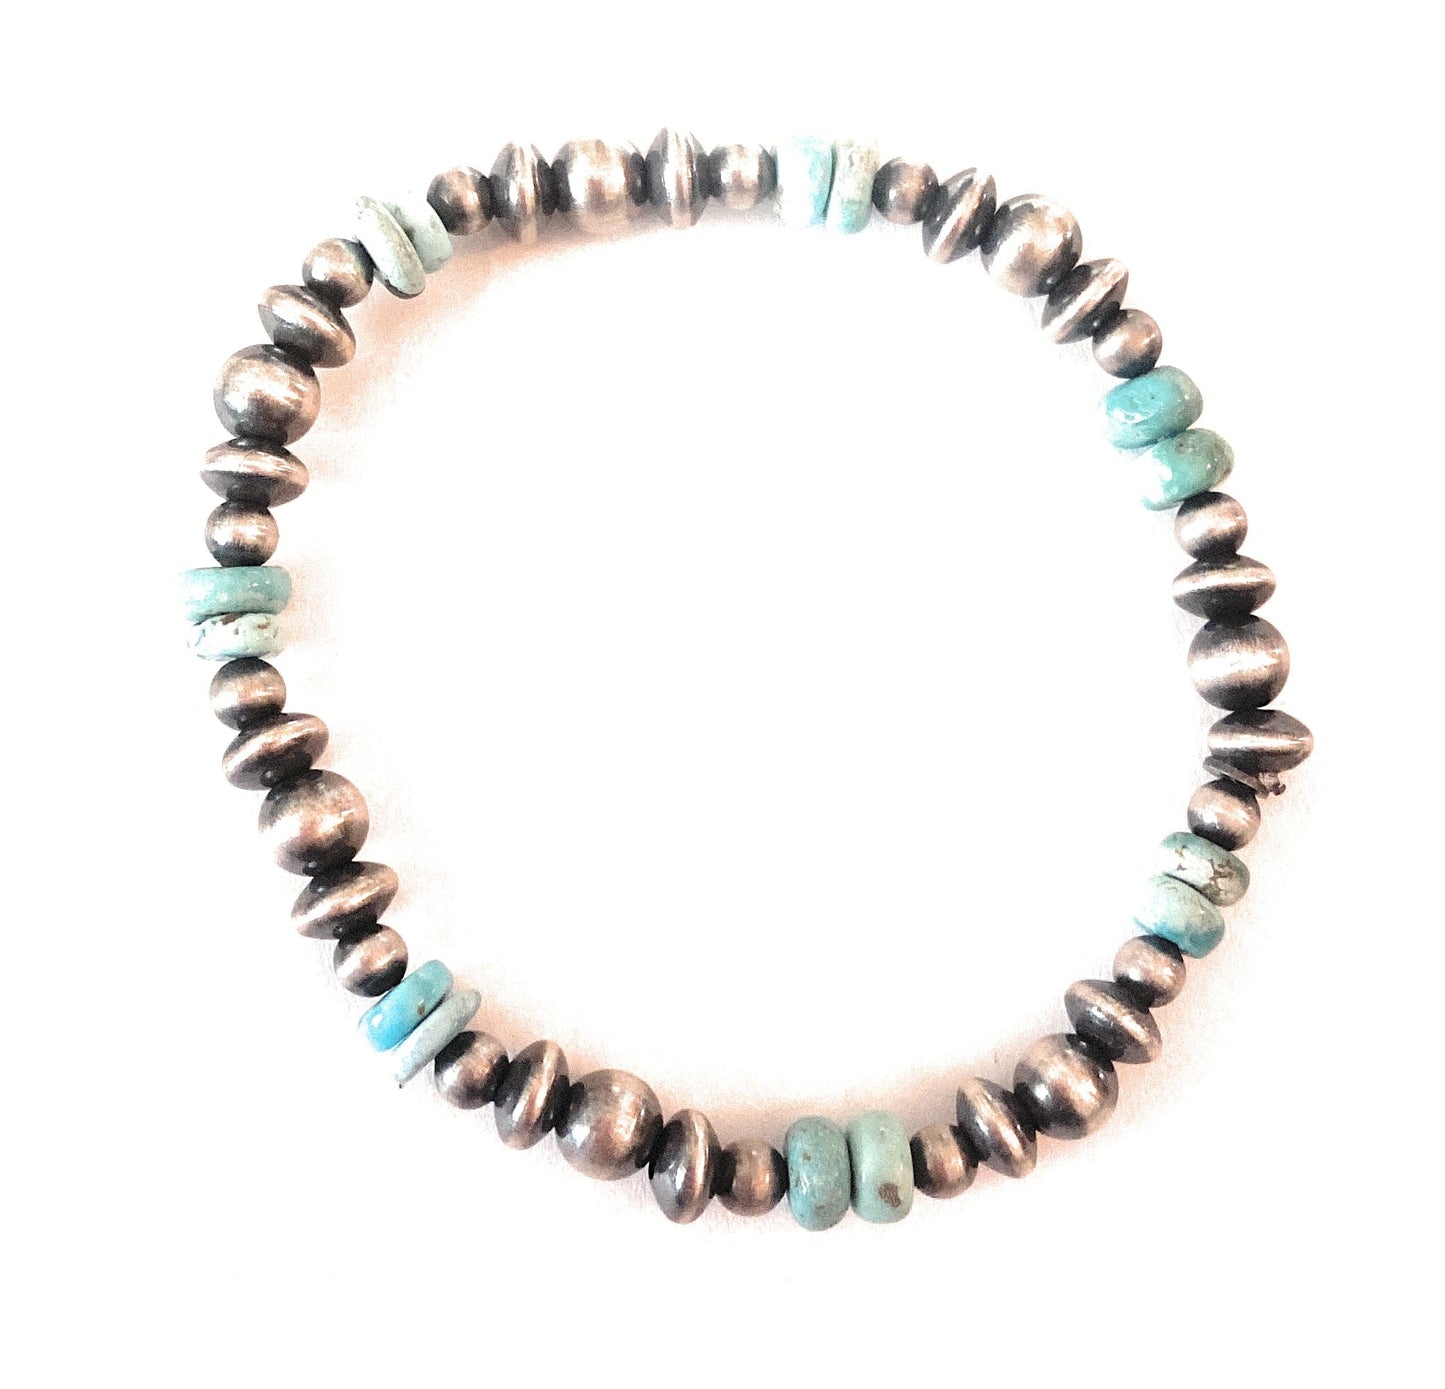 Handmade 14 Stone Turquoise & Sterling Silver Beaded Graduated Stretch Bracelet 14